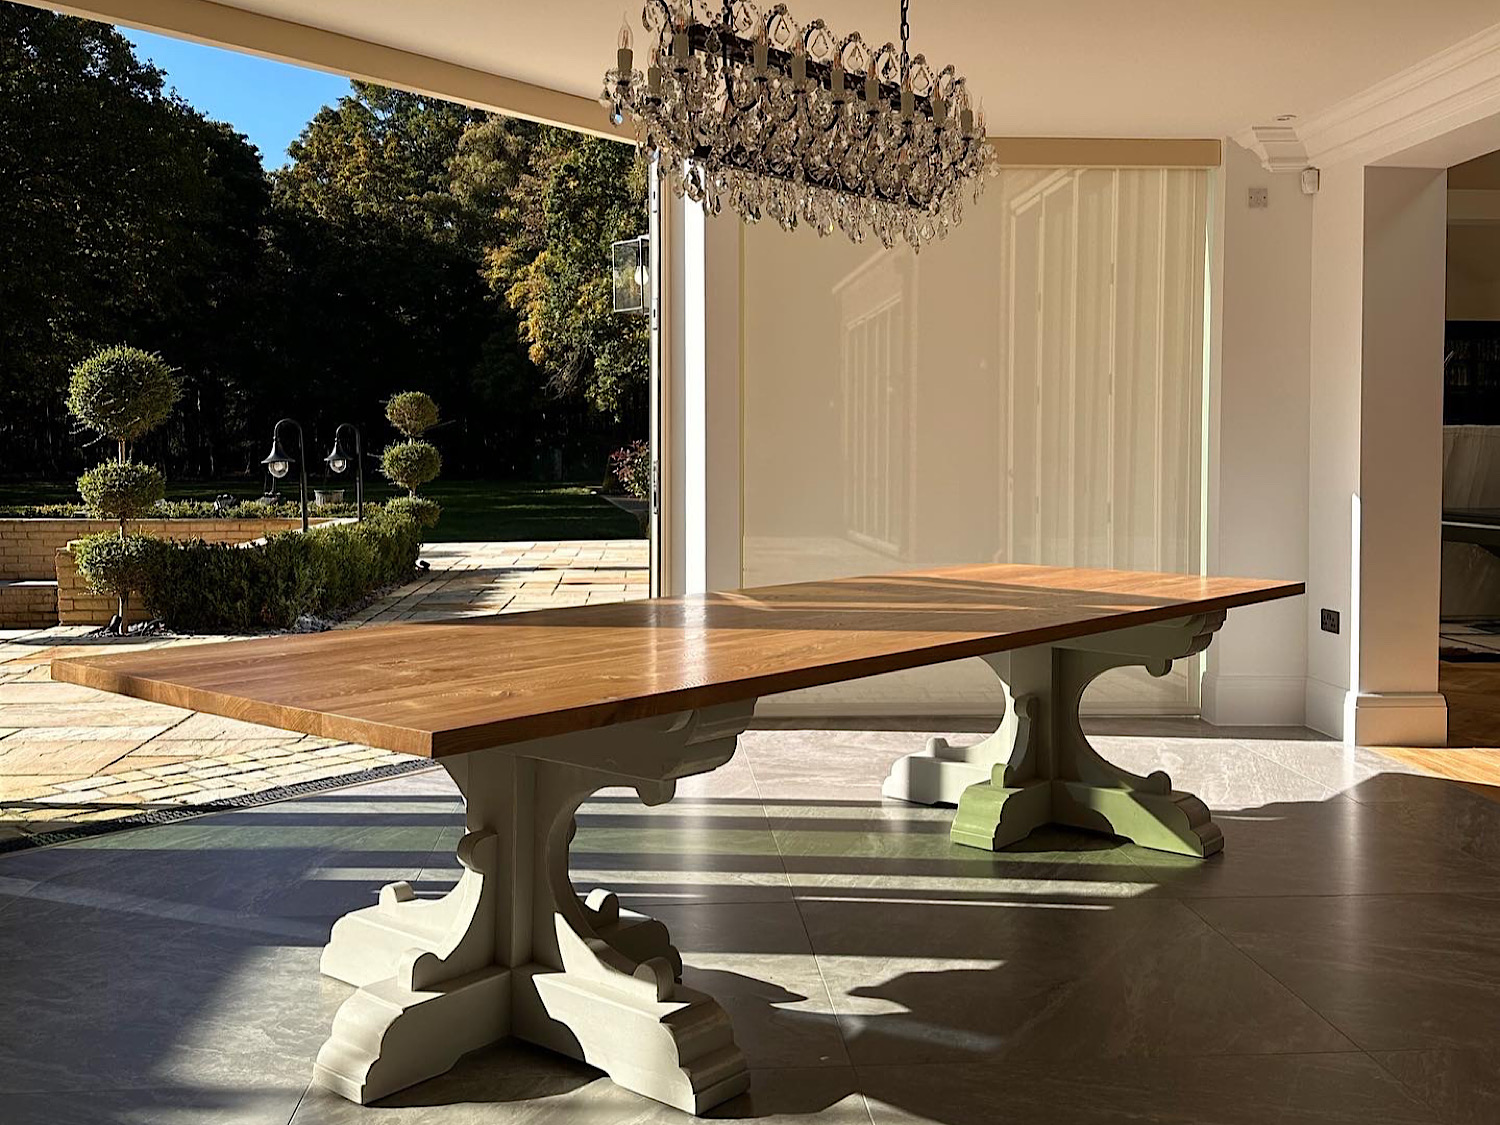 An absolutely stunning dining table